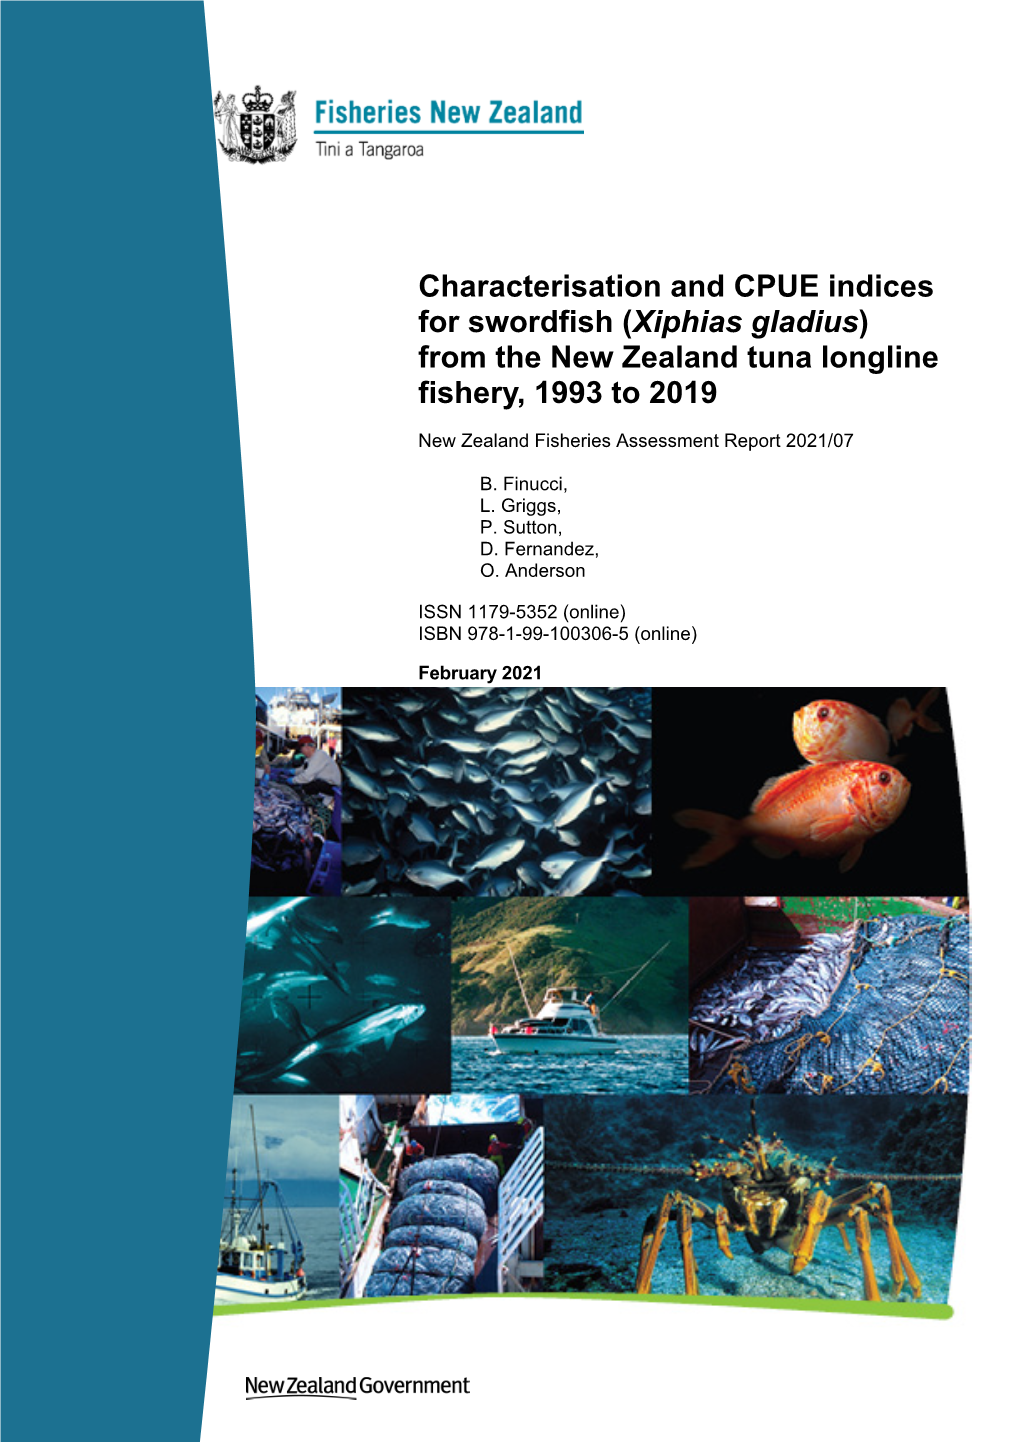 Characterisation and CPUE Indices for Swordfish (Xiphias Gladius) from the New Zealand Tuna Longline Fishery, 1993 to 2019